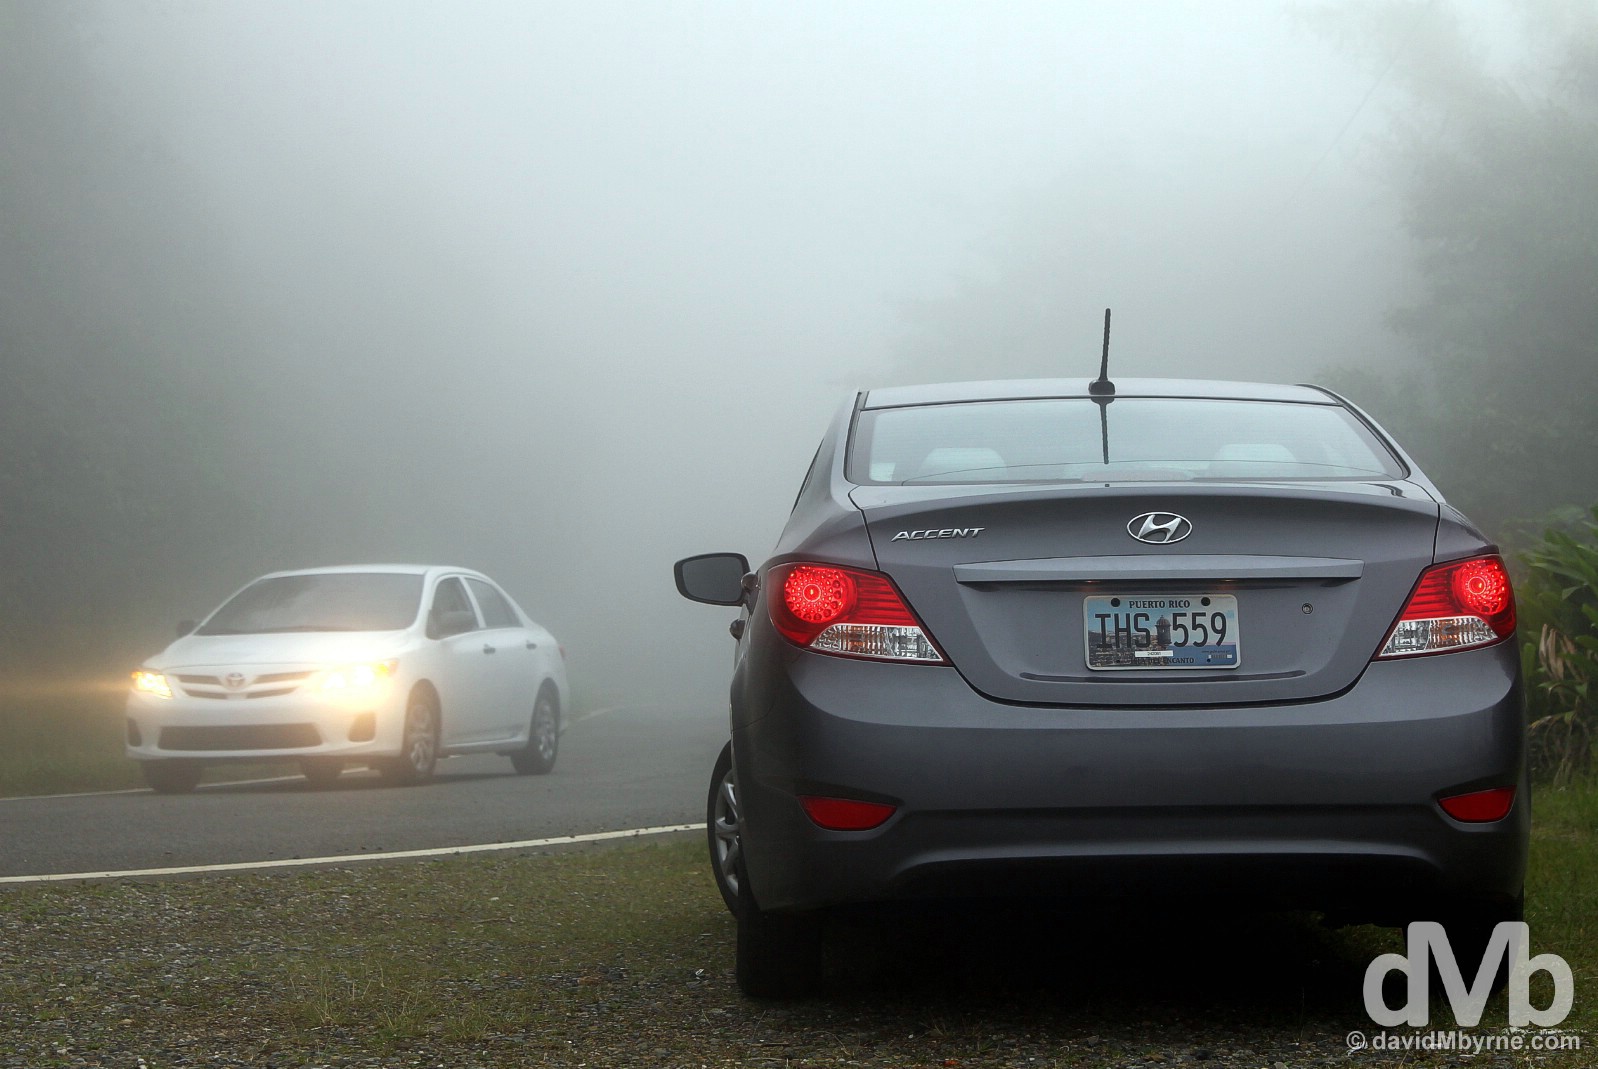 Hire car (& mist) on Ruta Panoramica, central Puerto Rico, Greater Antilles. June 4, 2015. 